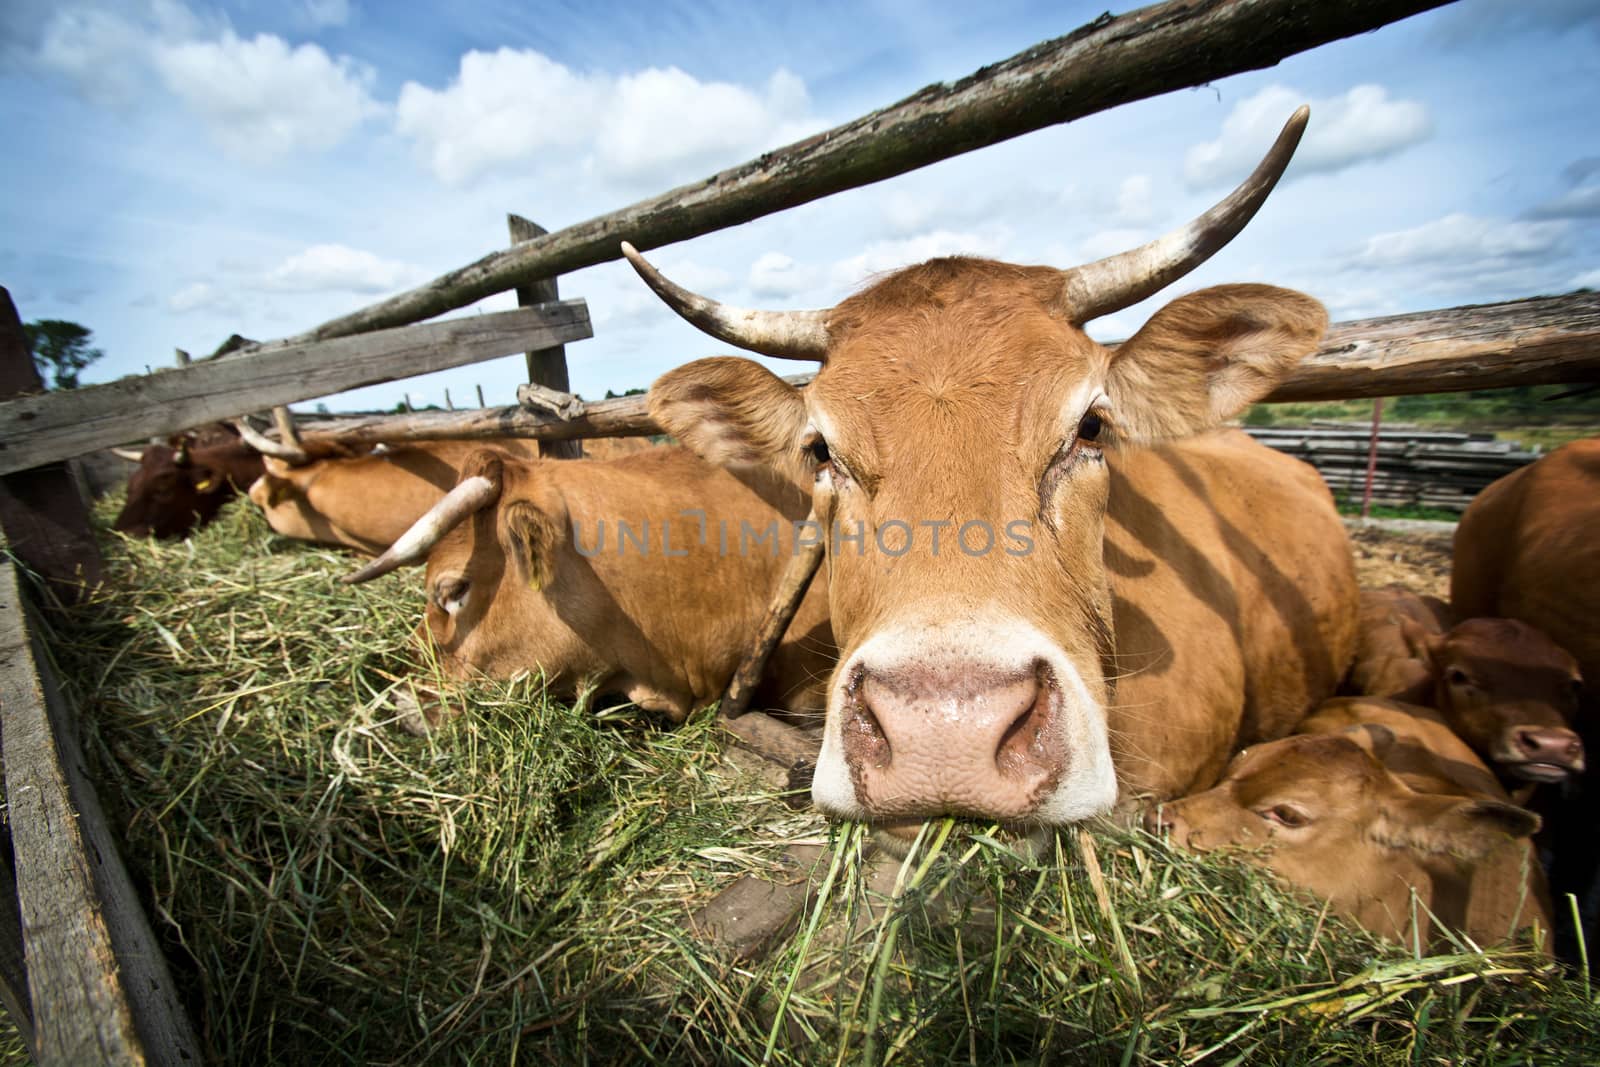 Cows eating straw. Animal breeding in the countryside.